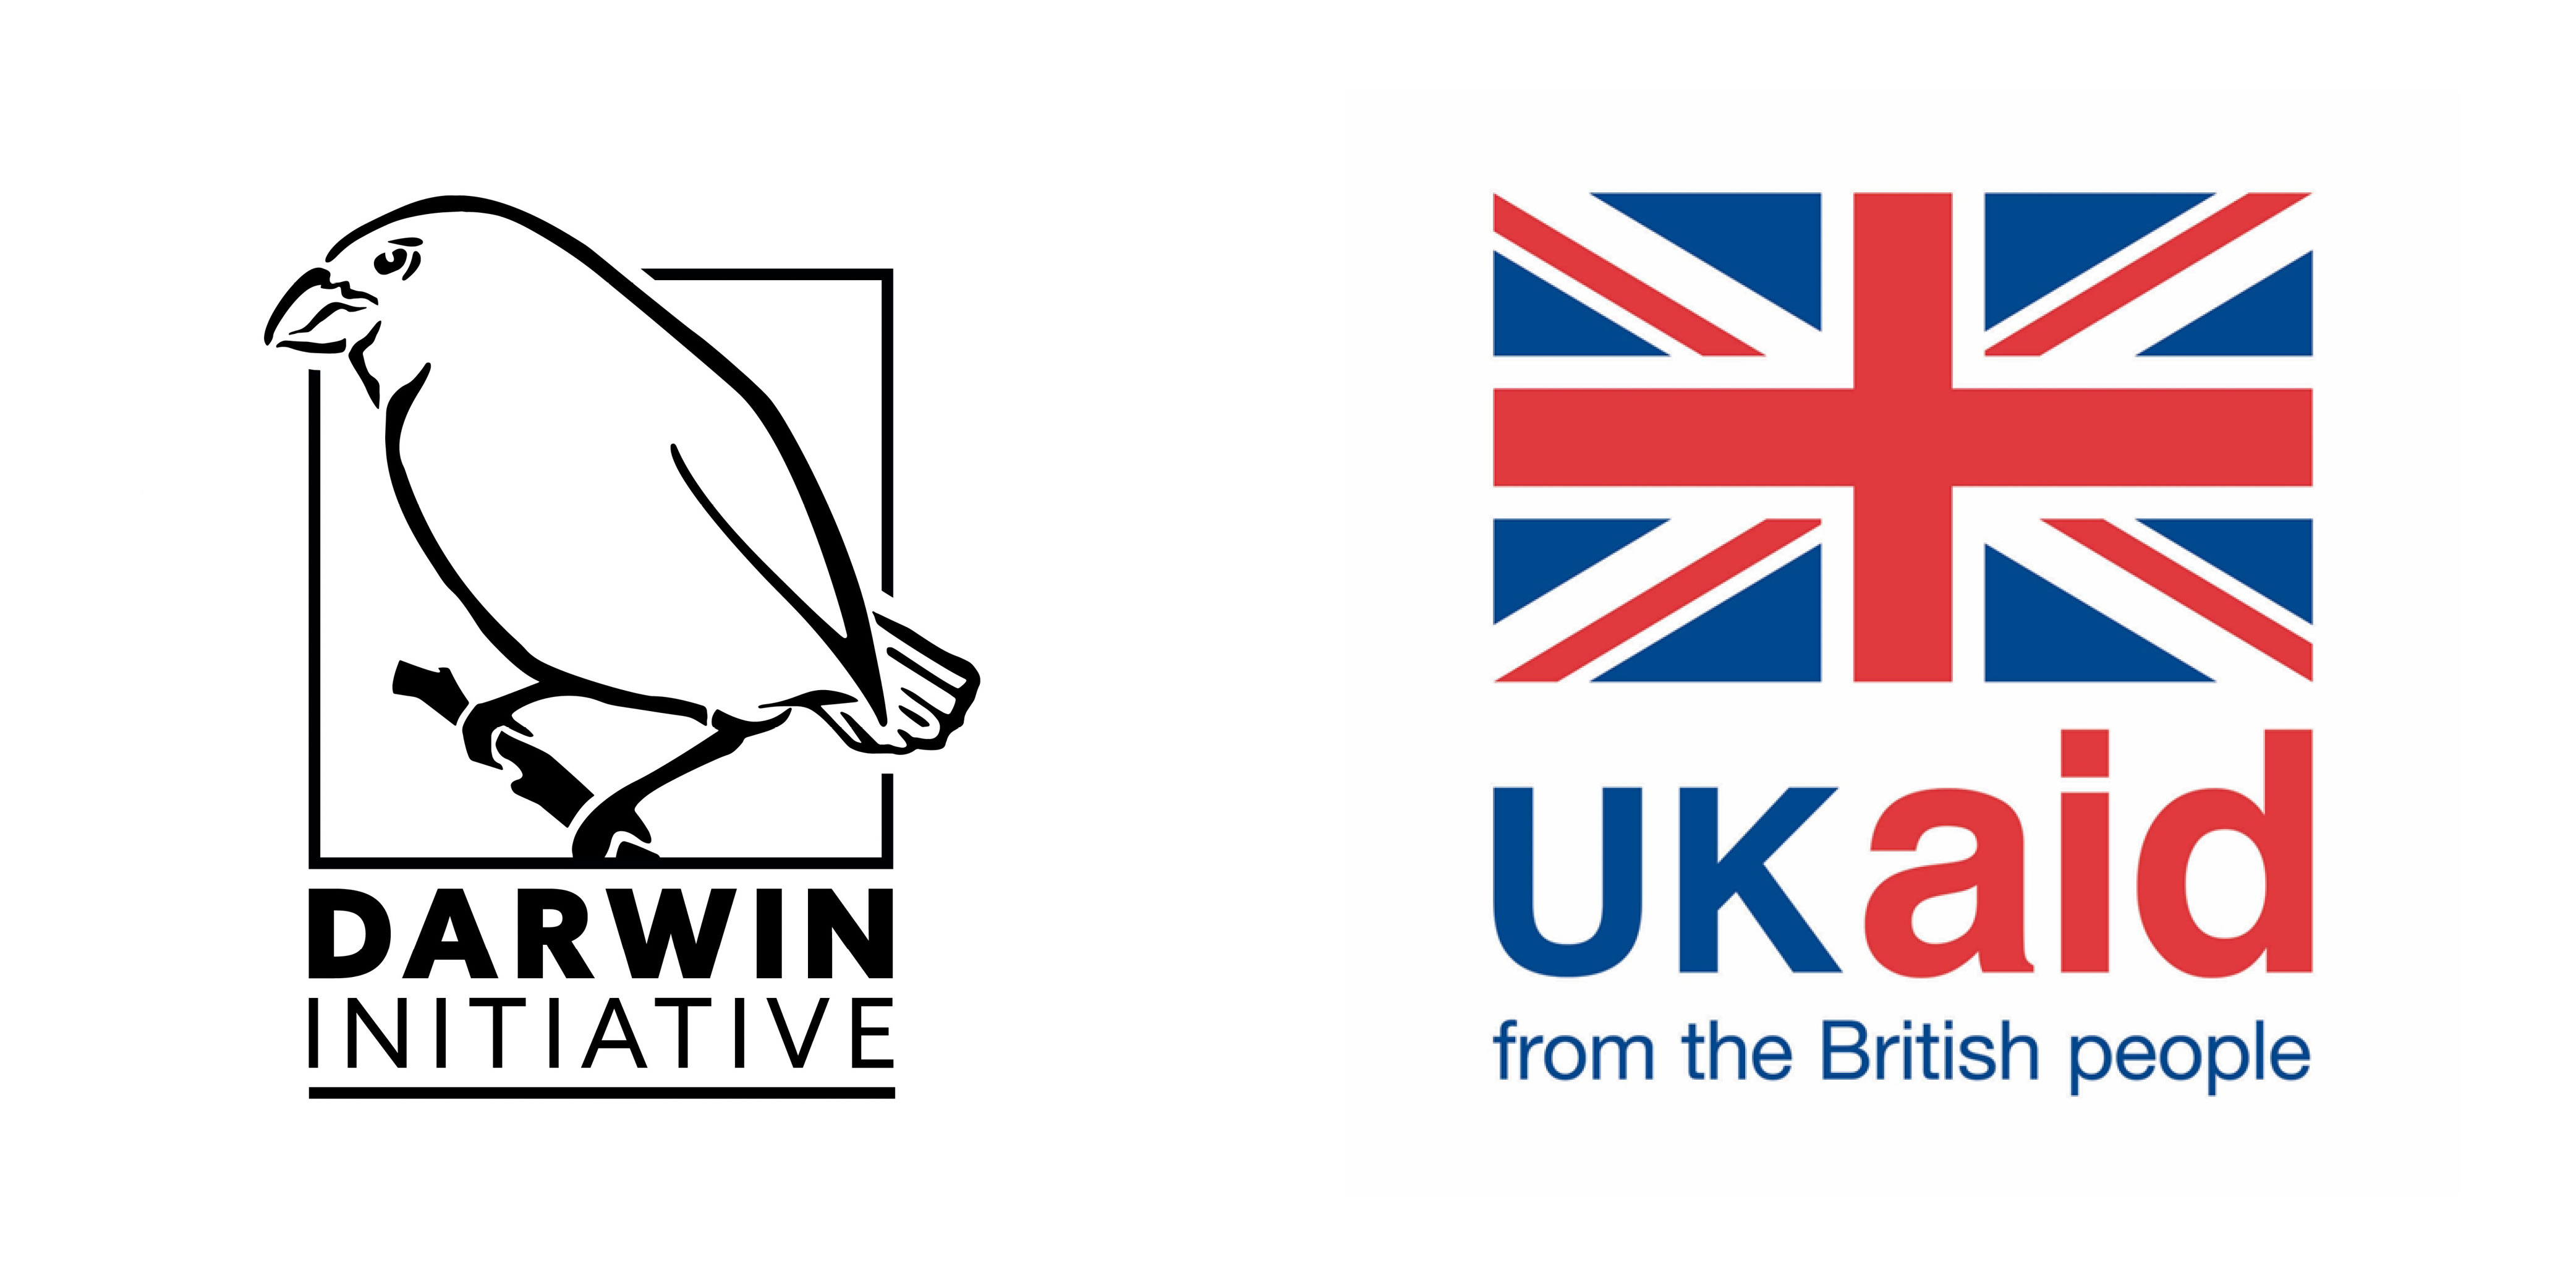 Darwin Initiative logo (simple black and white illustration of a bird perched on a branch) and UK Aid logo (union jack with text 'UK aid from the British people')